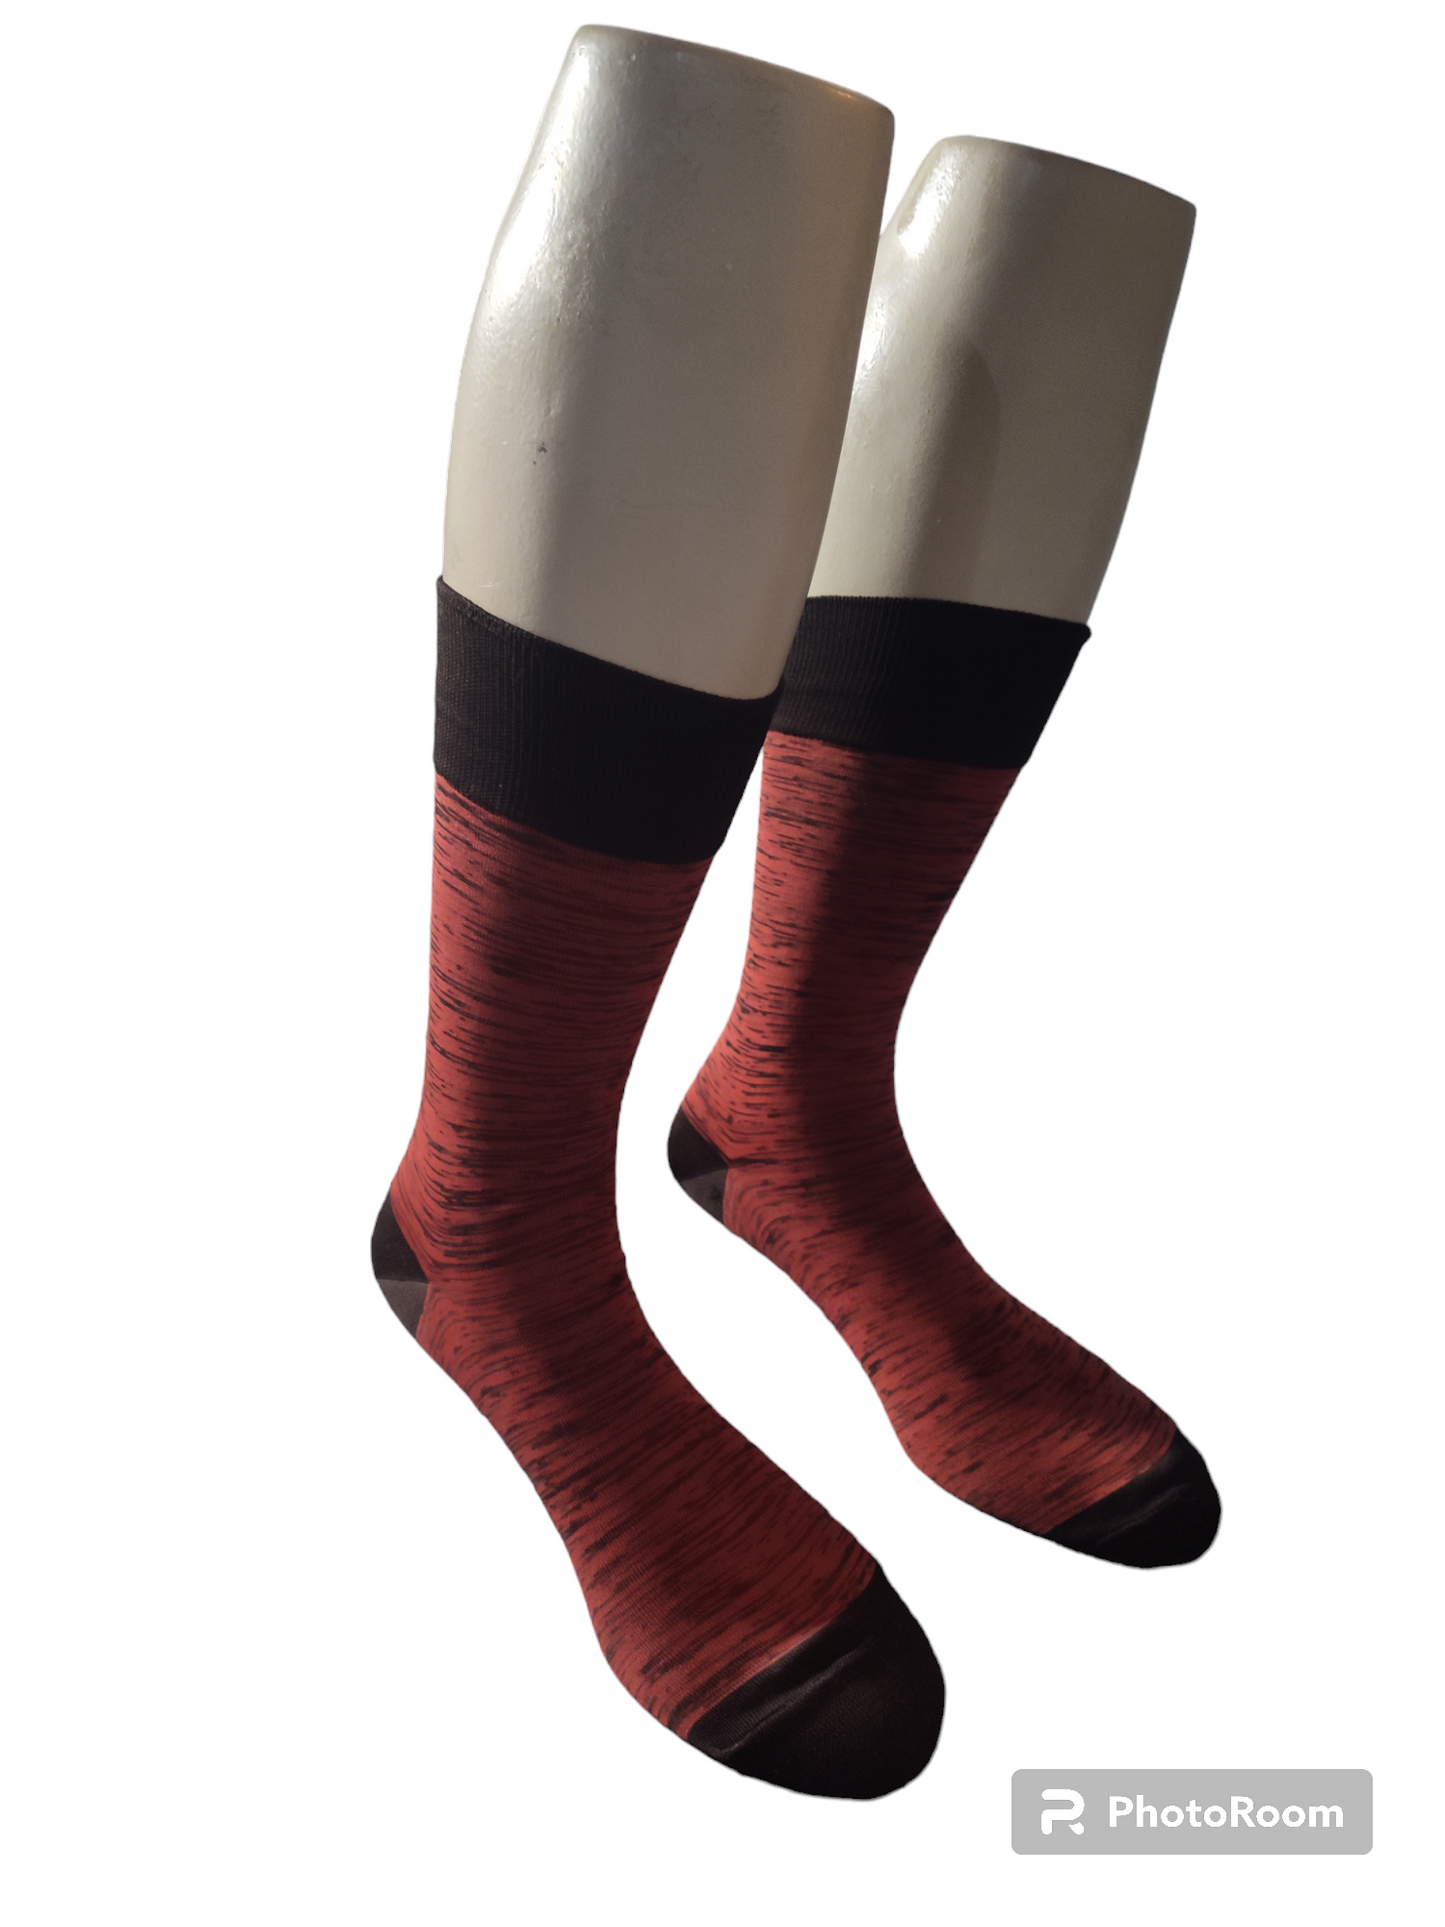 BROWN AND RED SOCKS